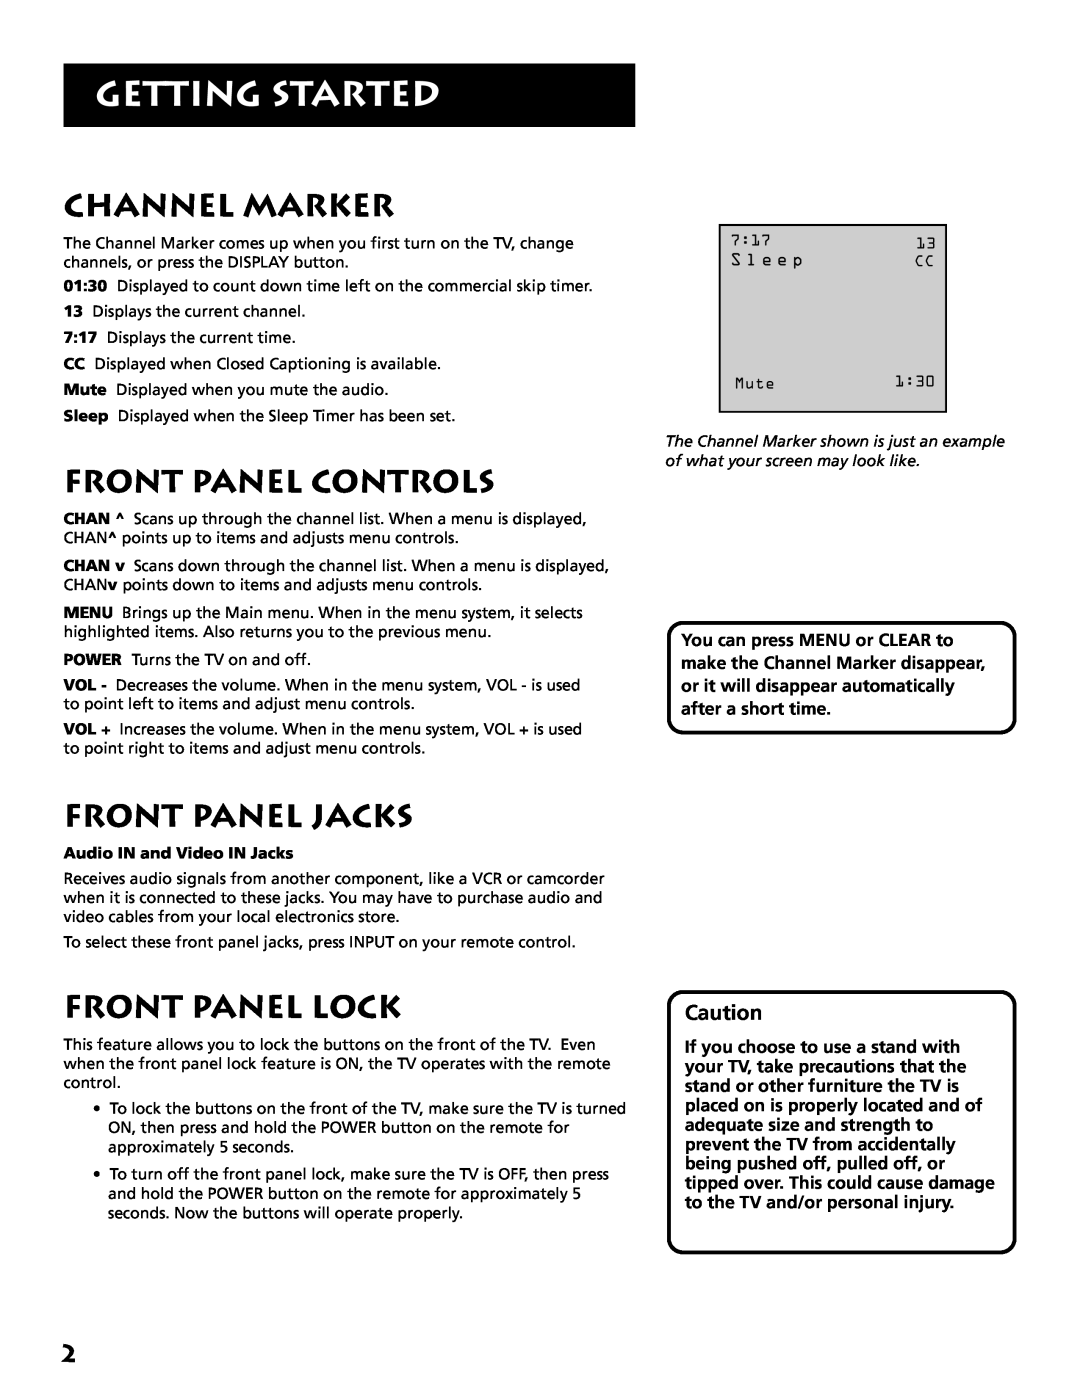 RCA E13319 manual Channel Marker, Front Panel Controls, Front Panel Jacks, Front Panel Lock, Getting Started 